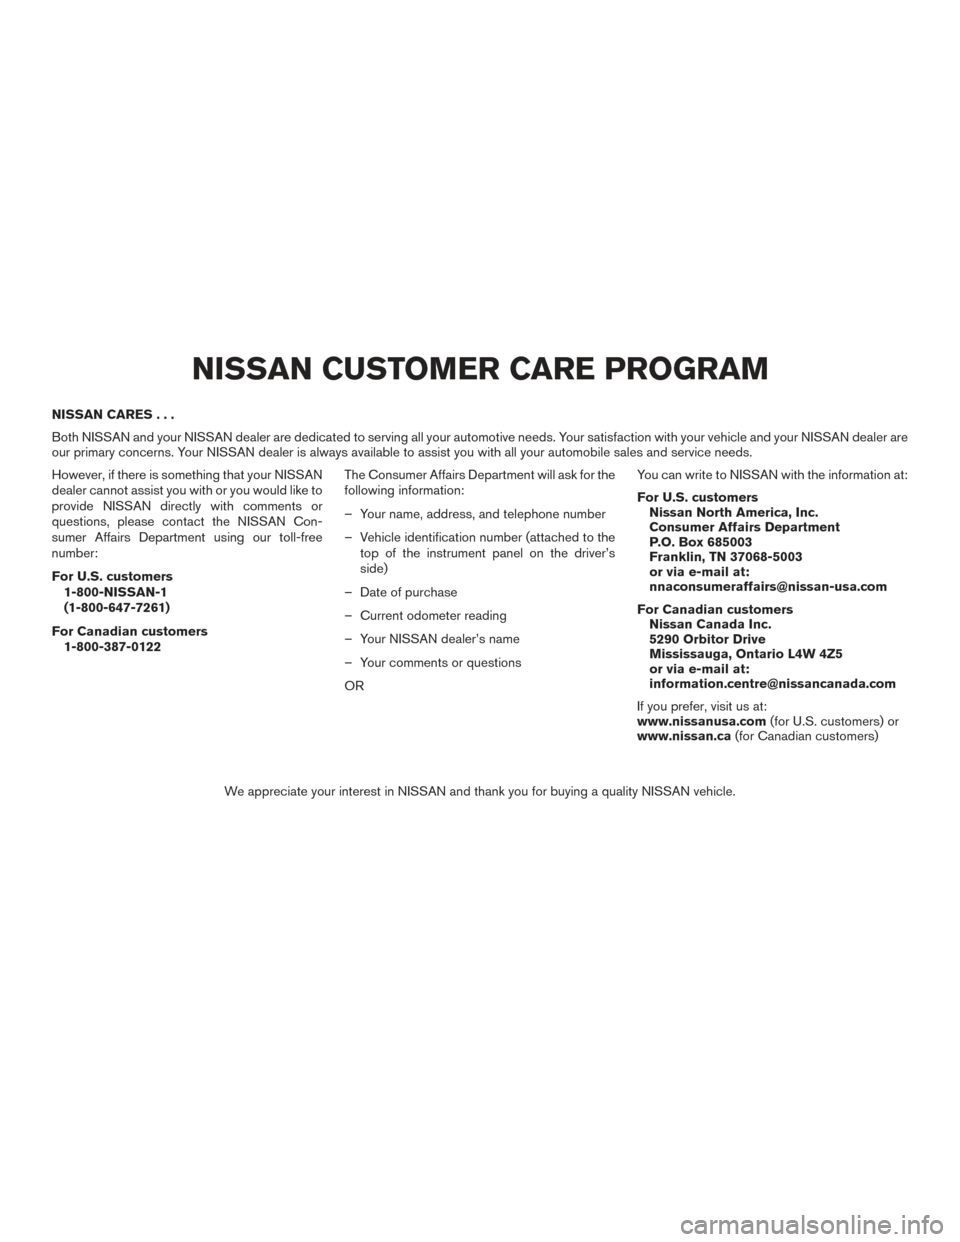 NISSAN ALTIMA 2015 L33 / 5.G Owners Manual NISSAN CARES...
Both NISSAN and your NISSAN dealer are dedicated to serving all your automotive needs. Your satisfaction with your vehicle and your NISSAN dealer are
our primary concerns. Your NISSAN 